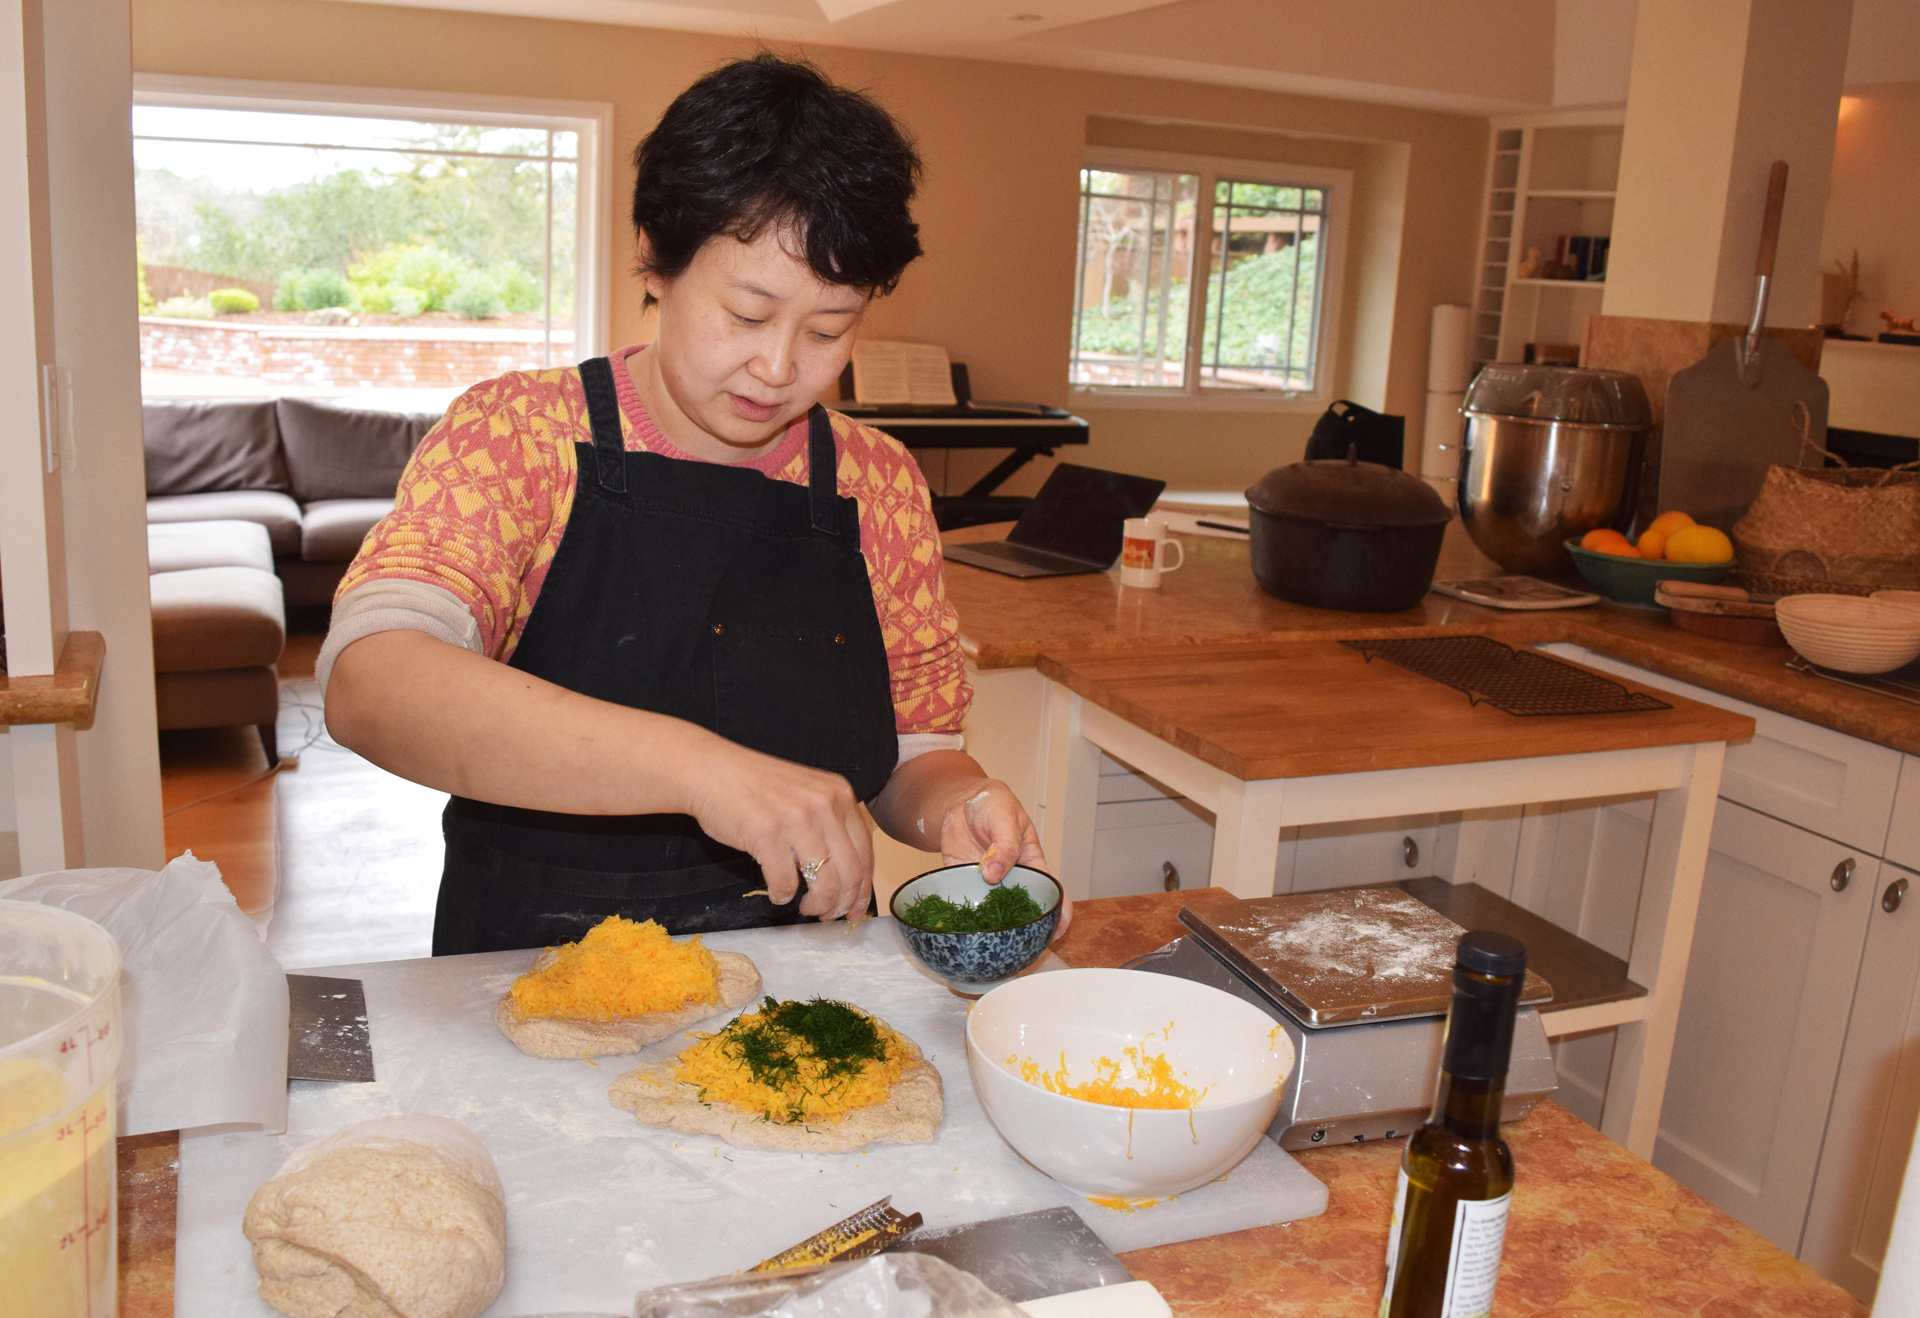 Bakery founder Tian Mayimin makes a wide variety of naturally leavened breads in her kitchen in Menlo Park, such as yummy, cheese-filled rolls.